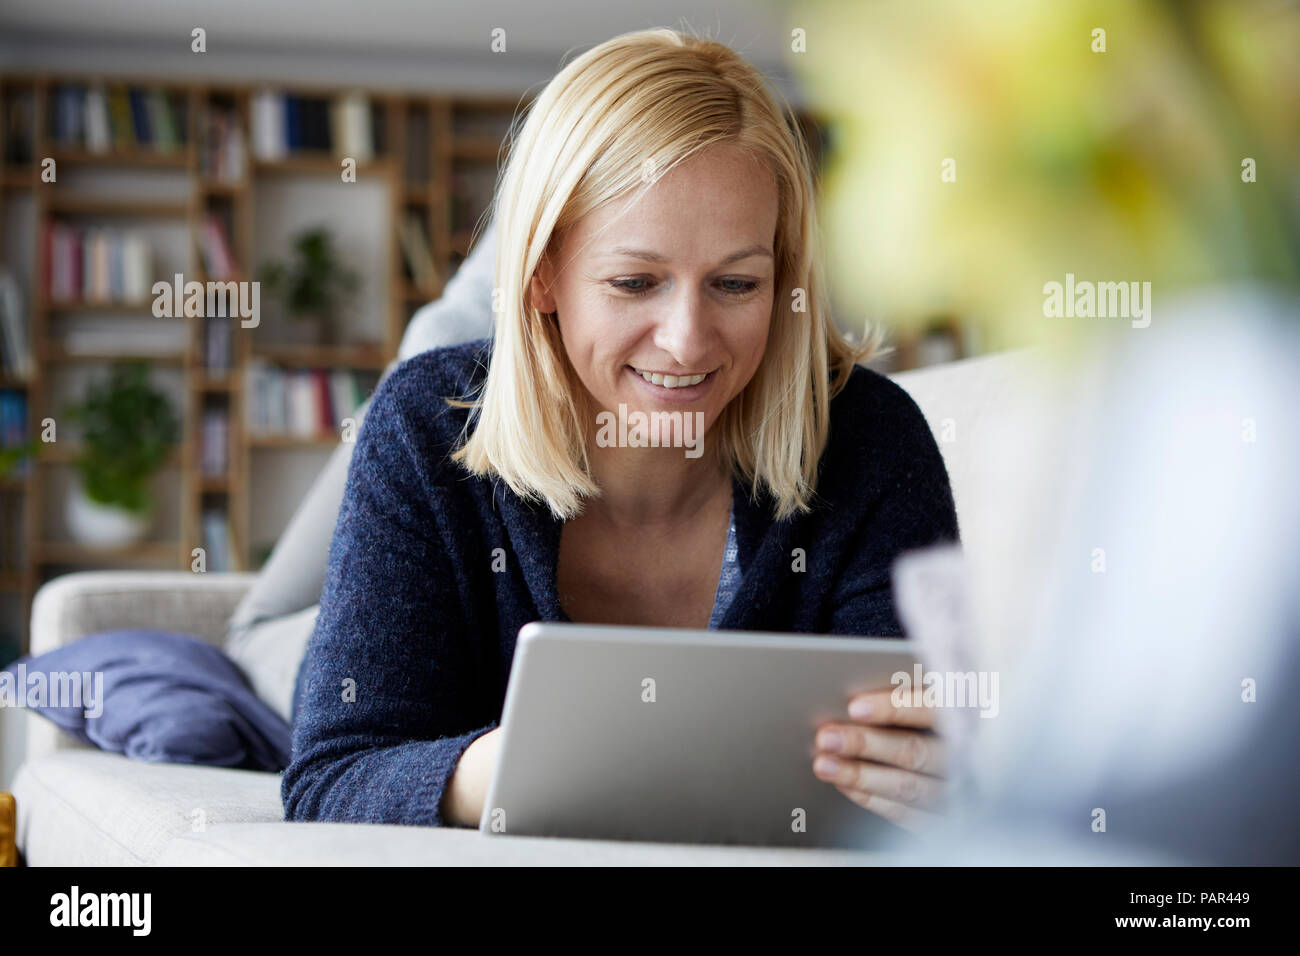 Woman using digital tablet, relaxing on couch Stock Photo